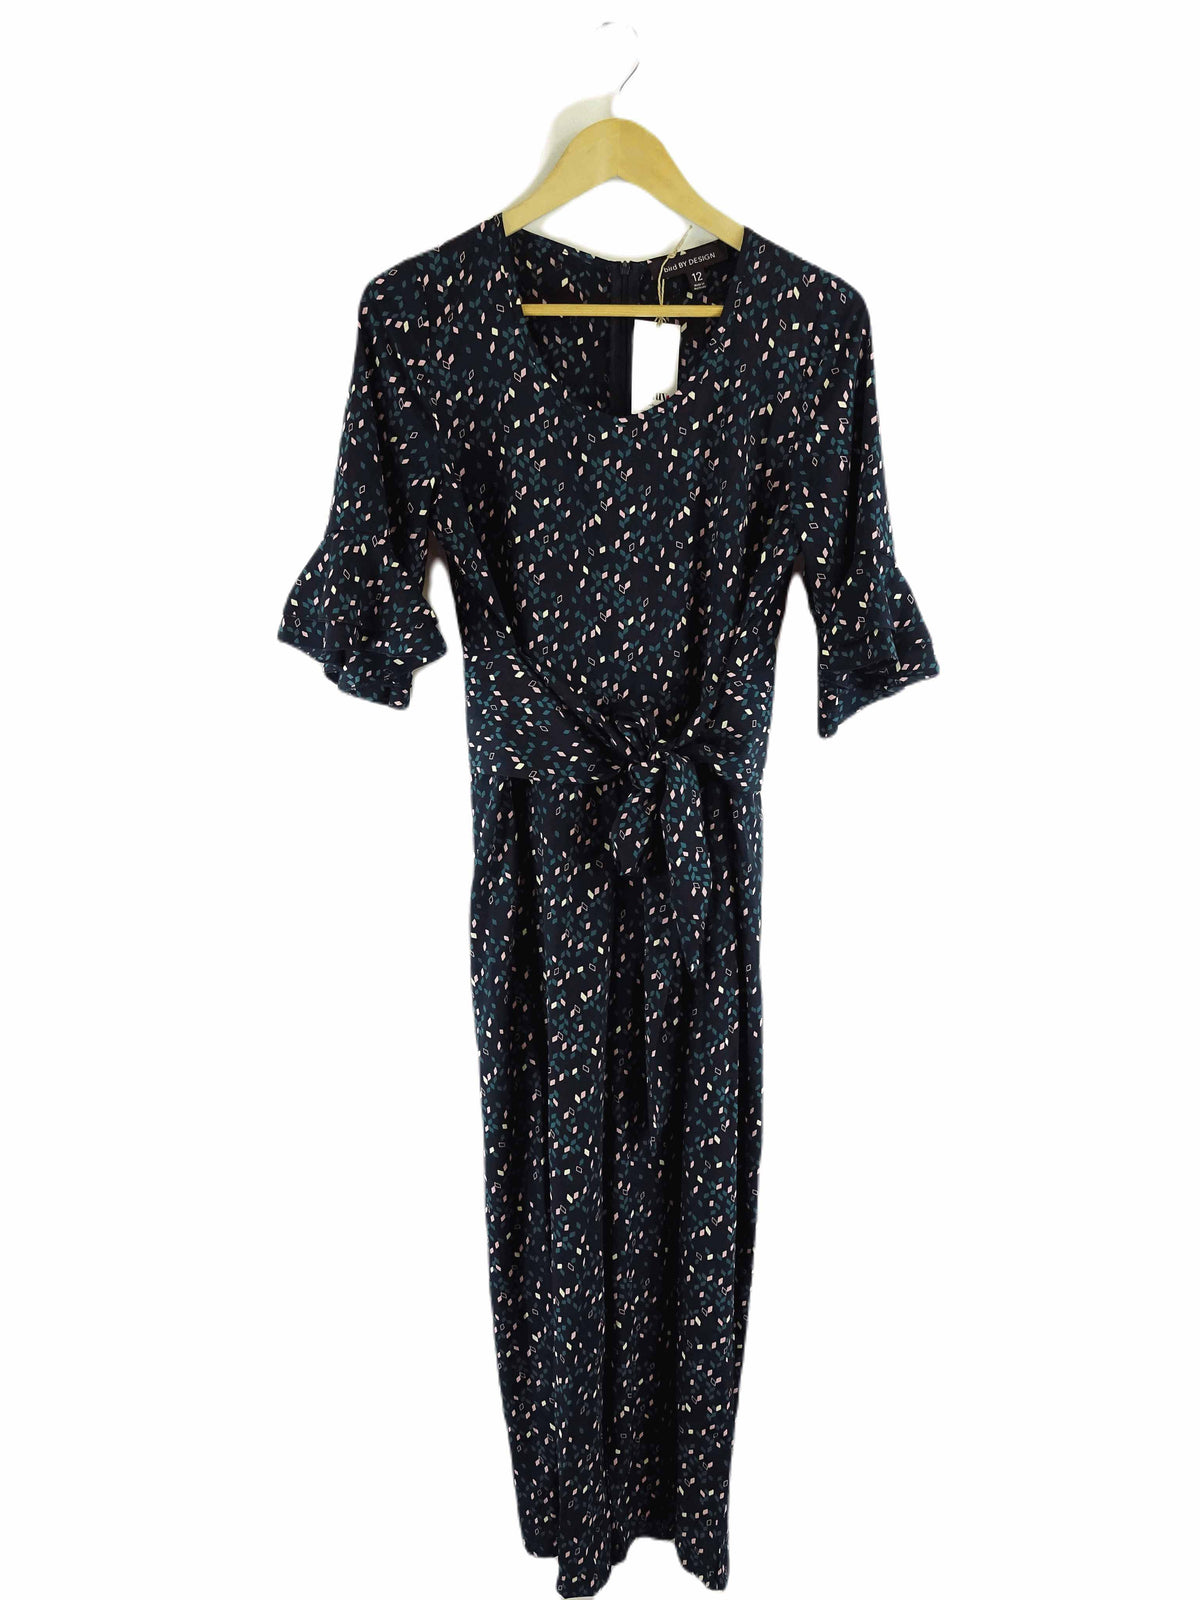 Bird by Design Navy Patterned Jumpsuit 12